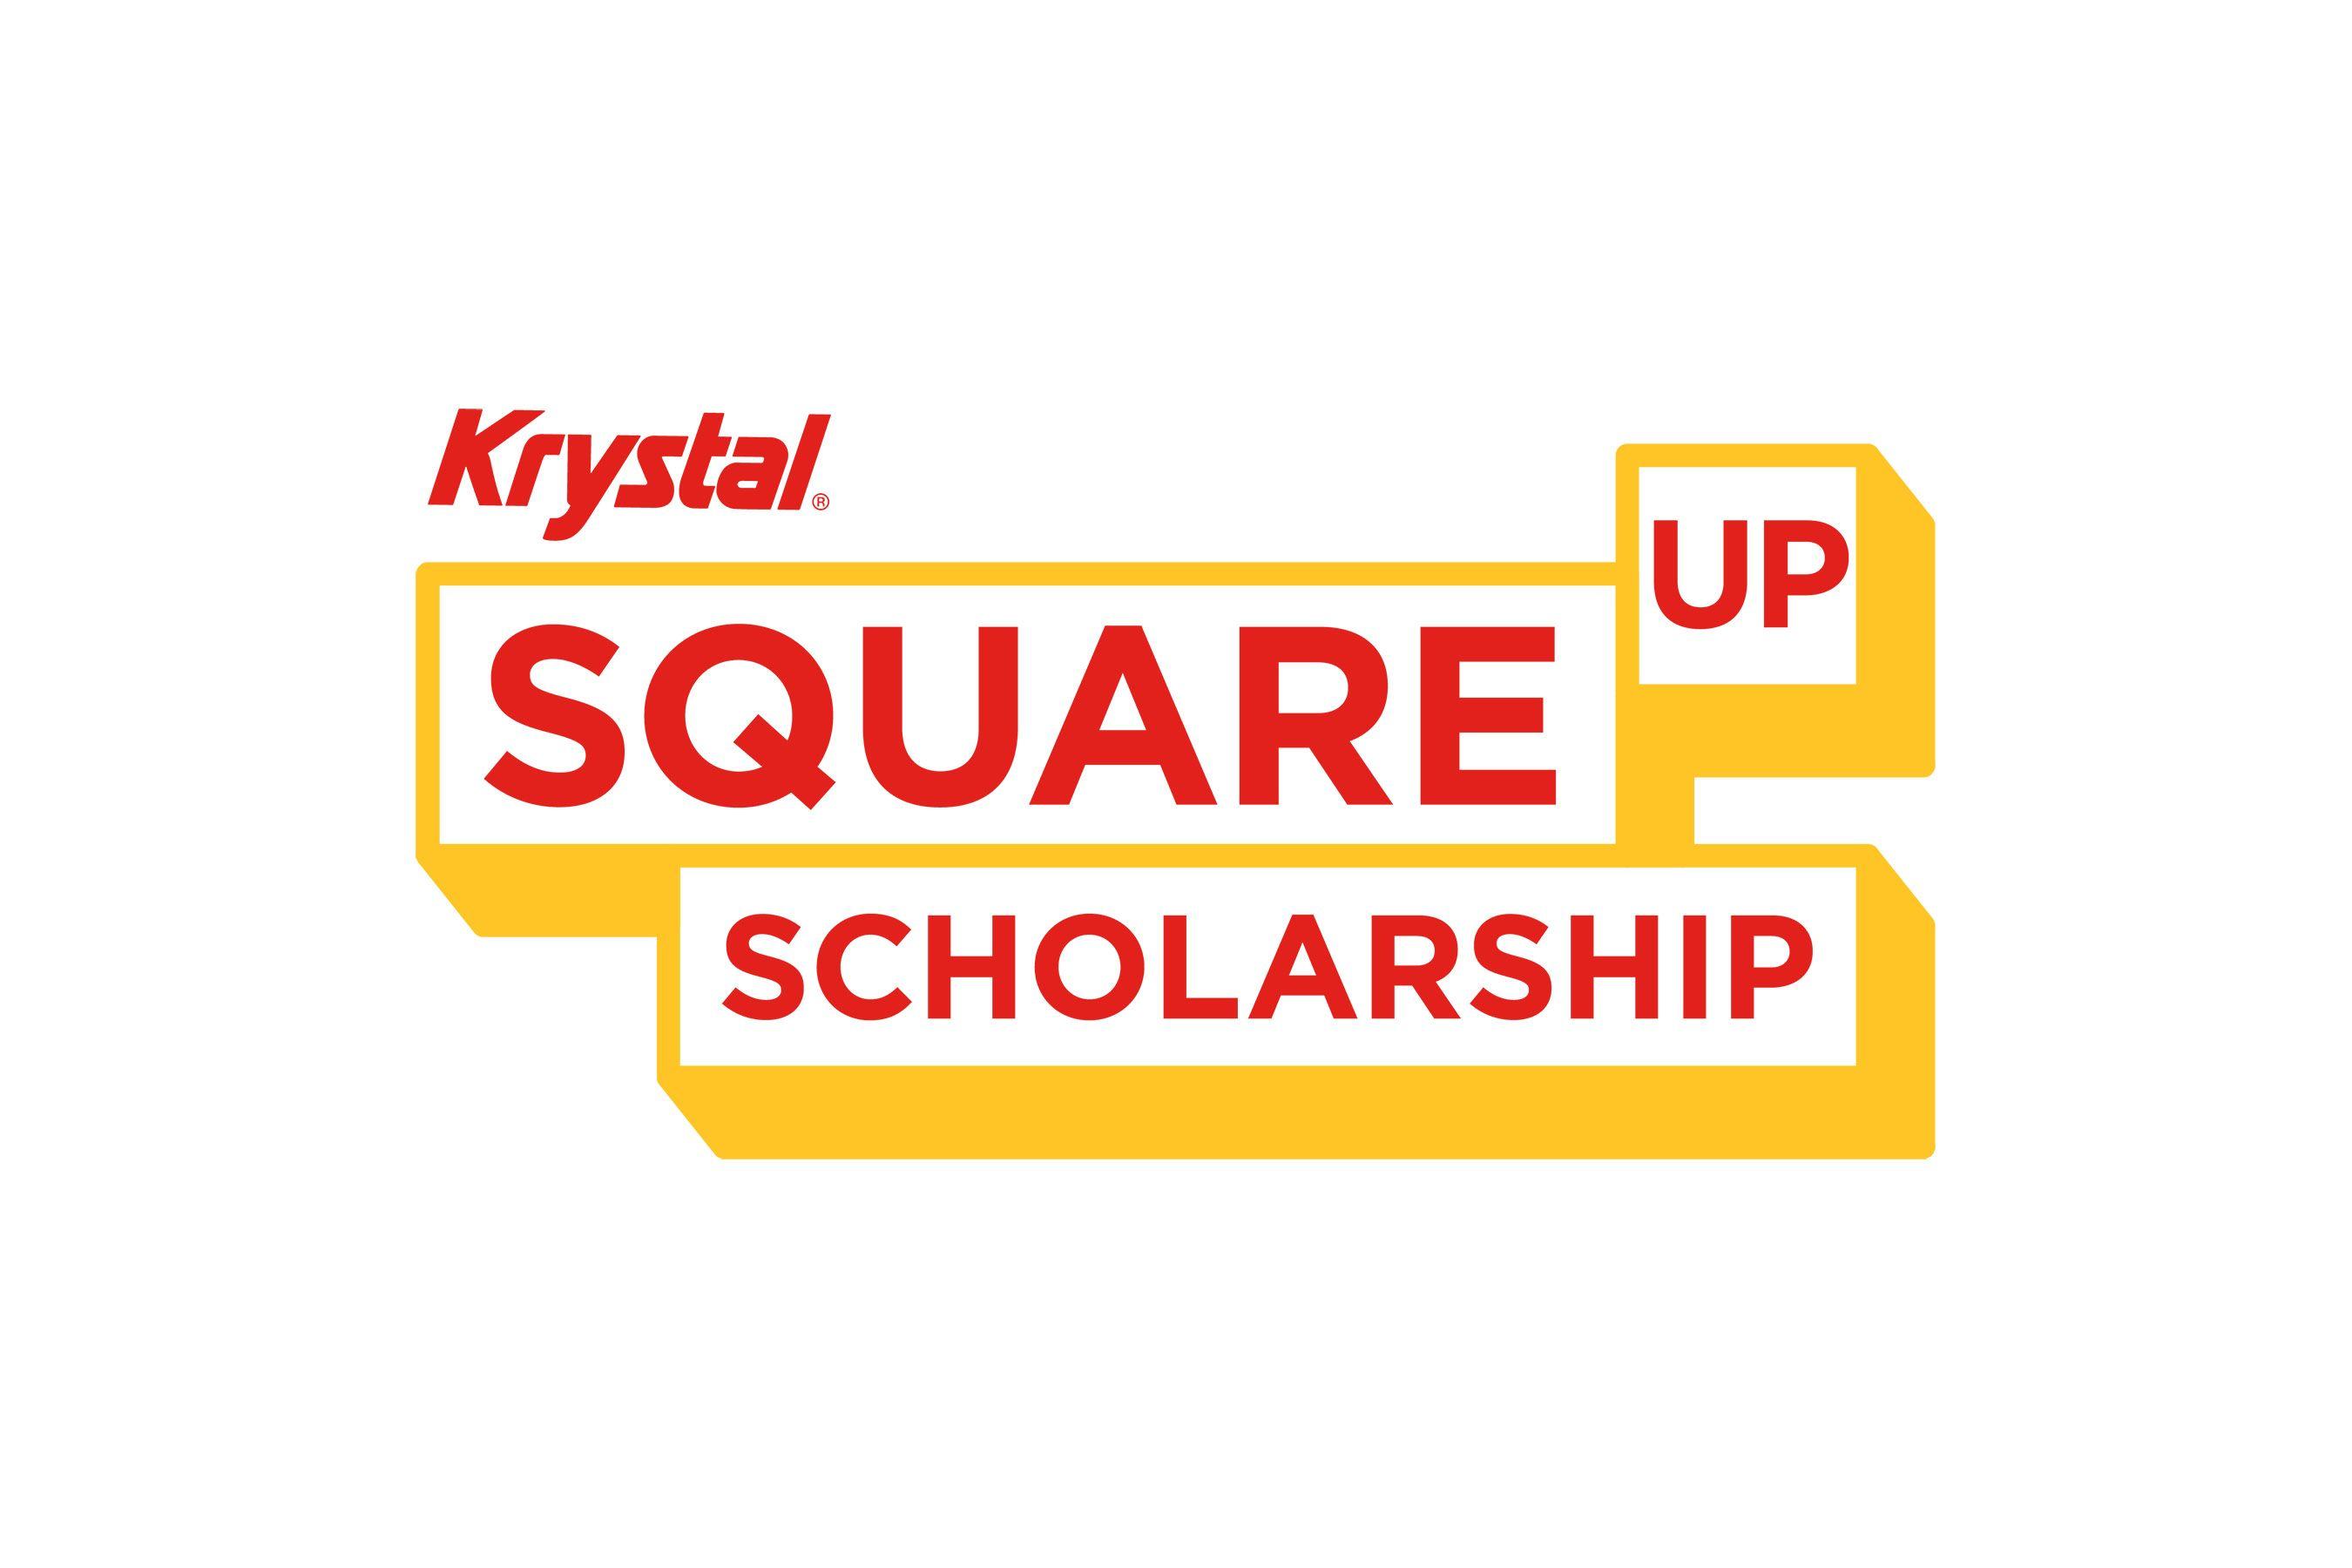 Square Up Logo - Krystal launches Square Up Scholarship program for employees